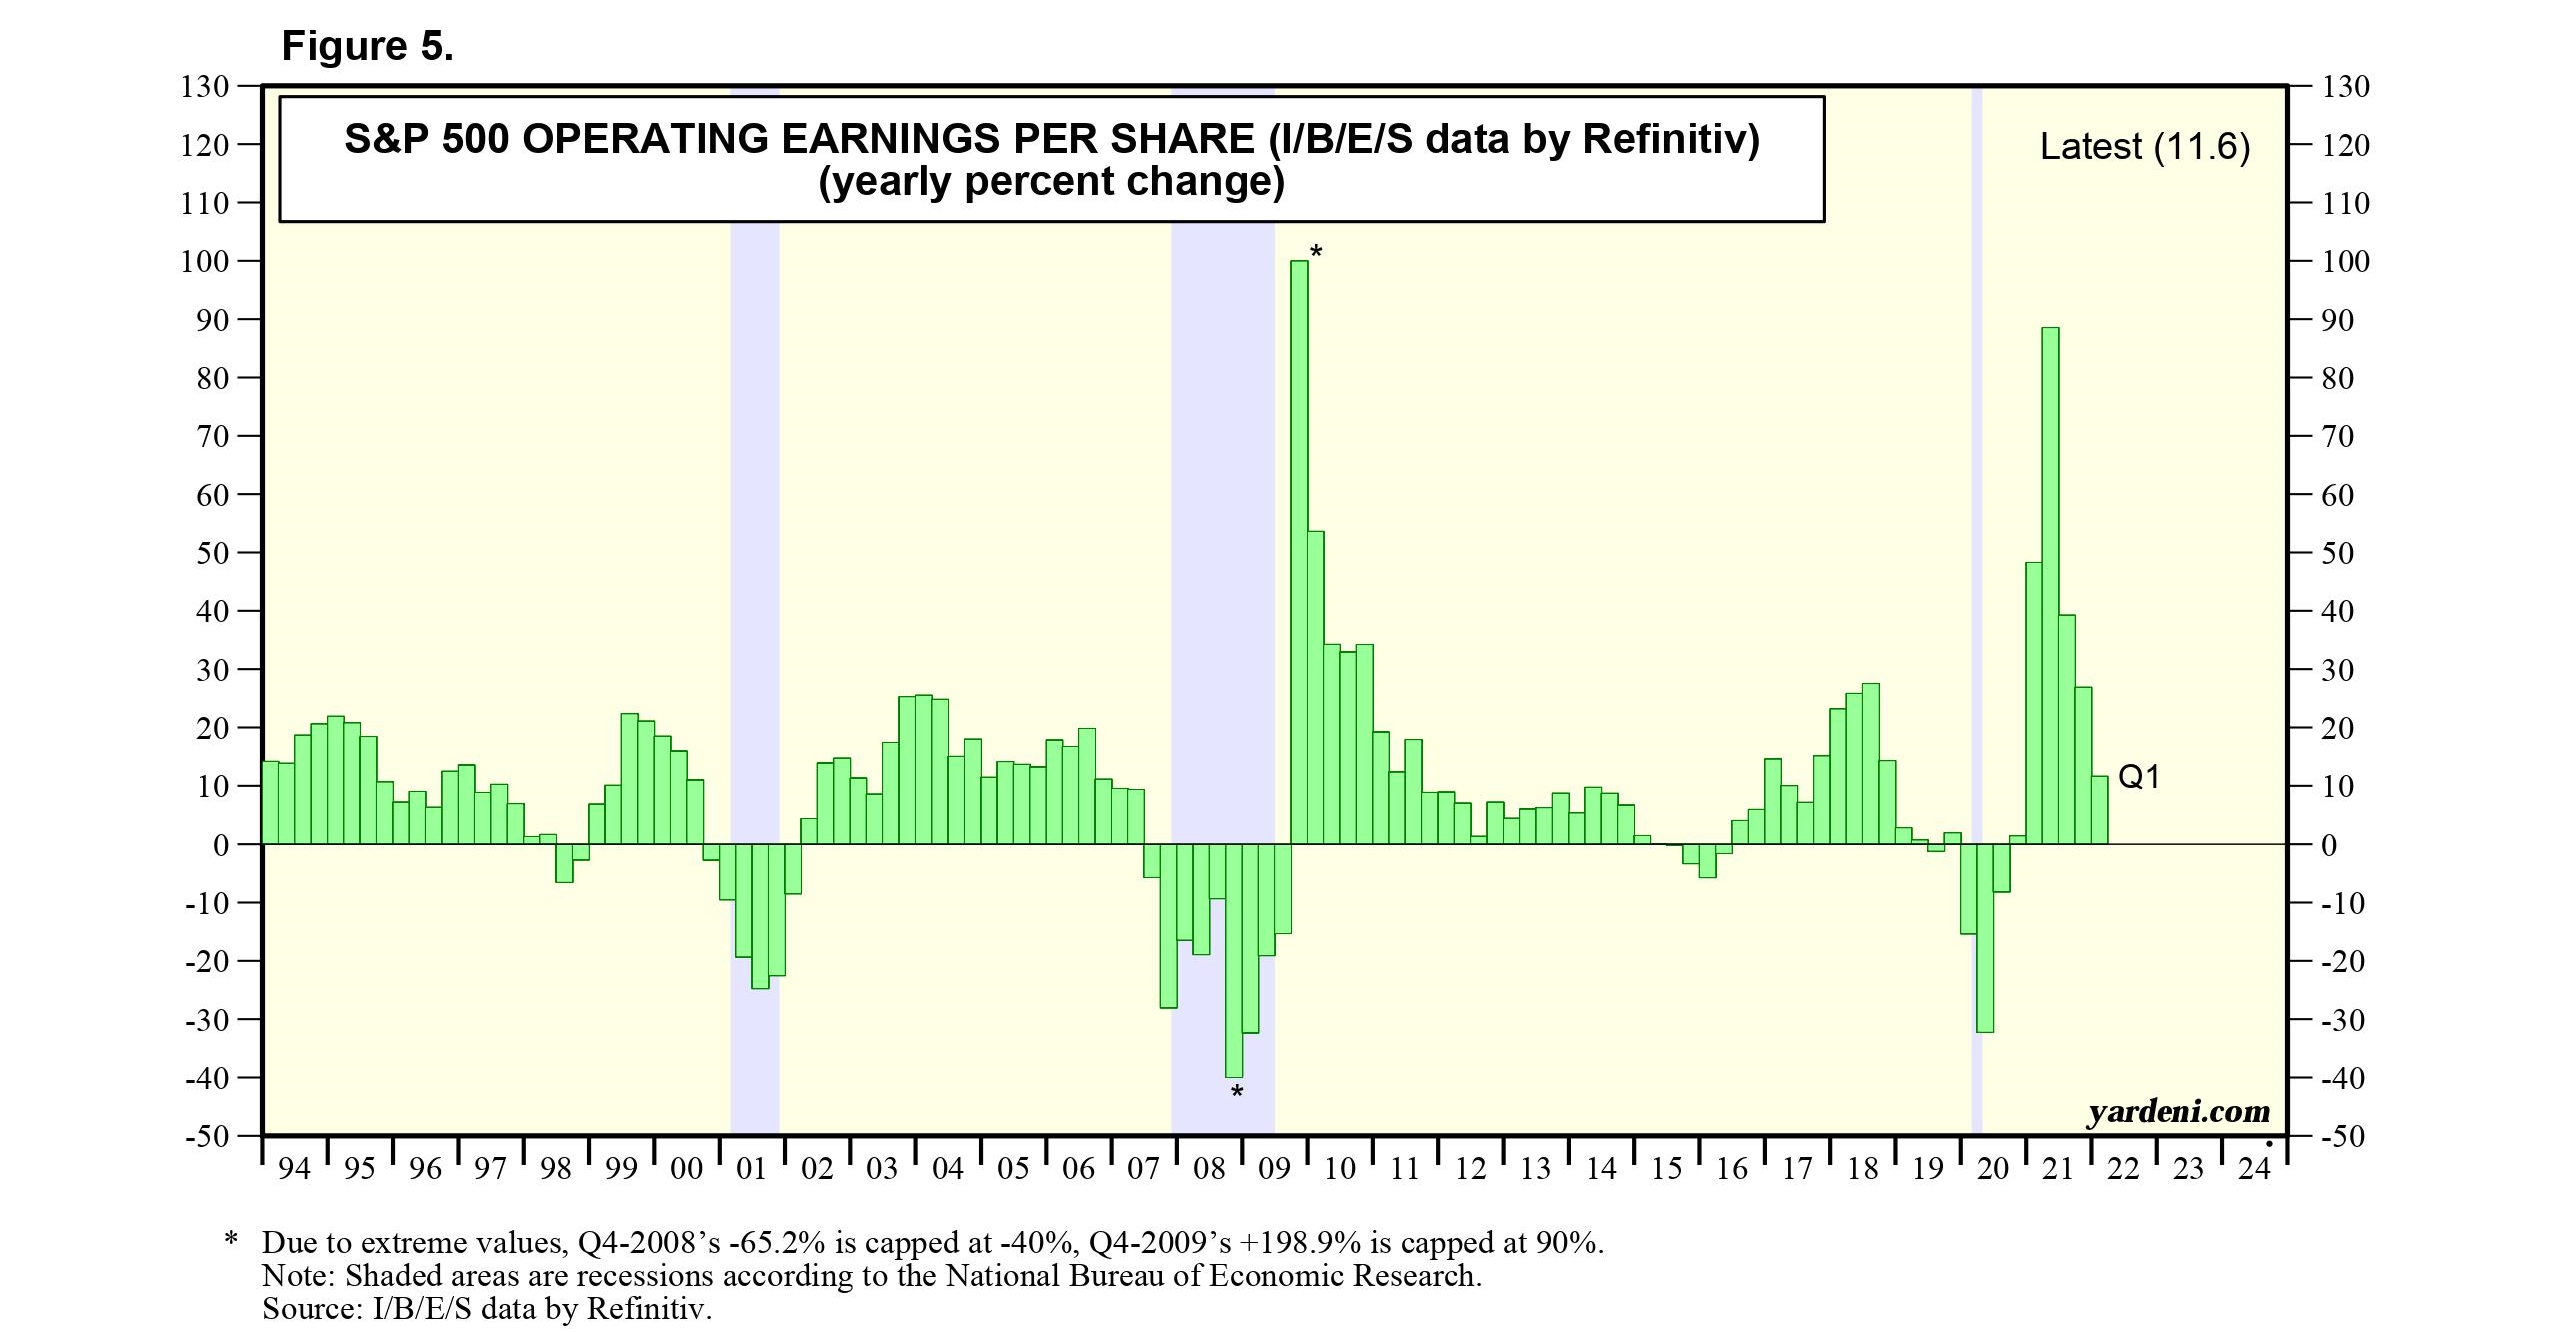 S&P 500 Operating Earnings Per Share